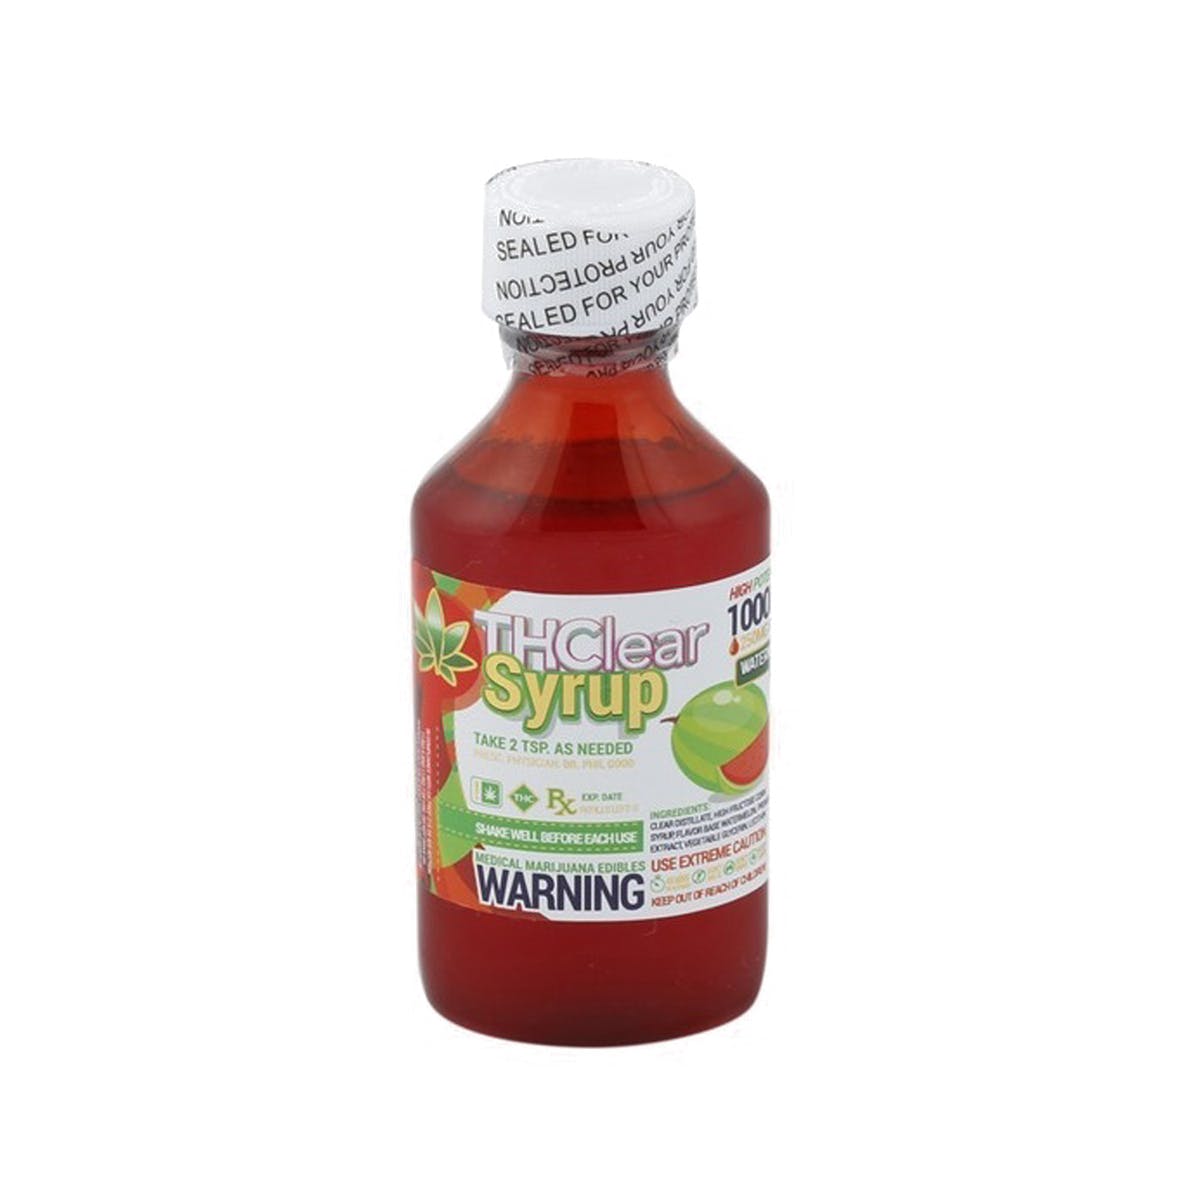 marijuana-dispensaries-manchester-remedy-in-los-angeles-watermelon-syrup-1000mg